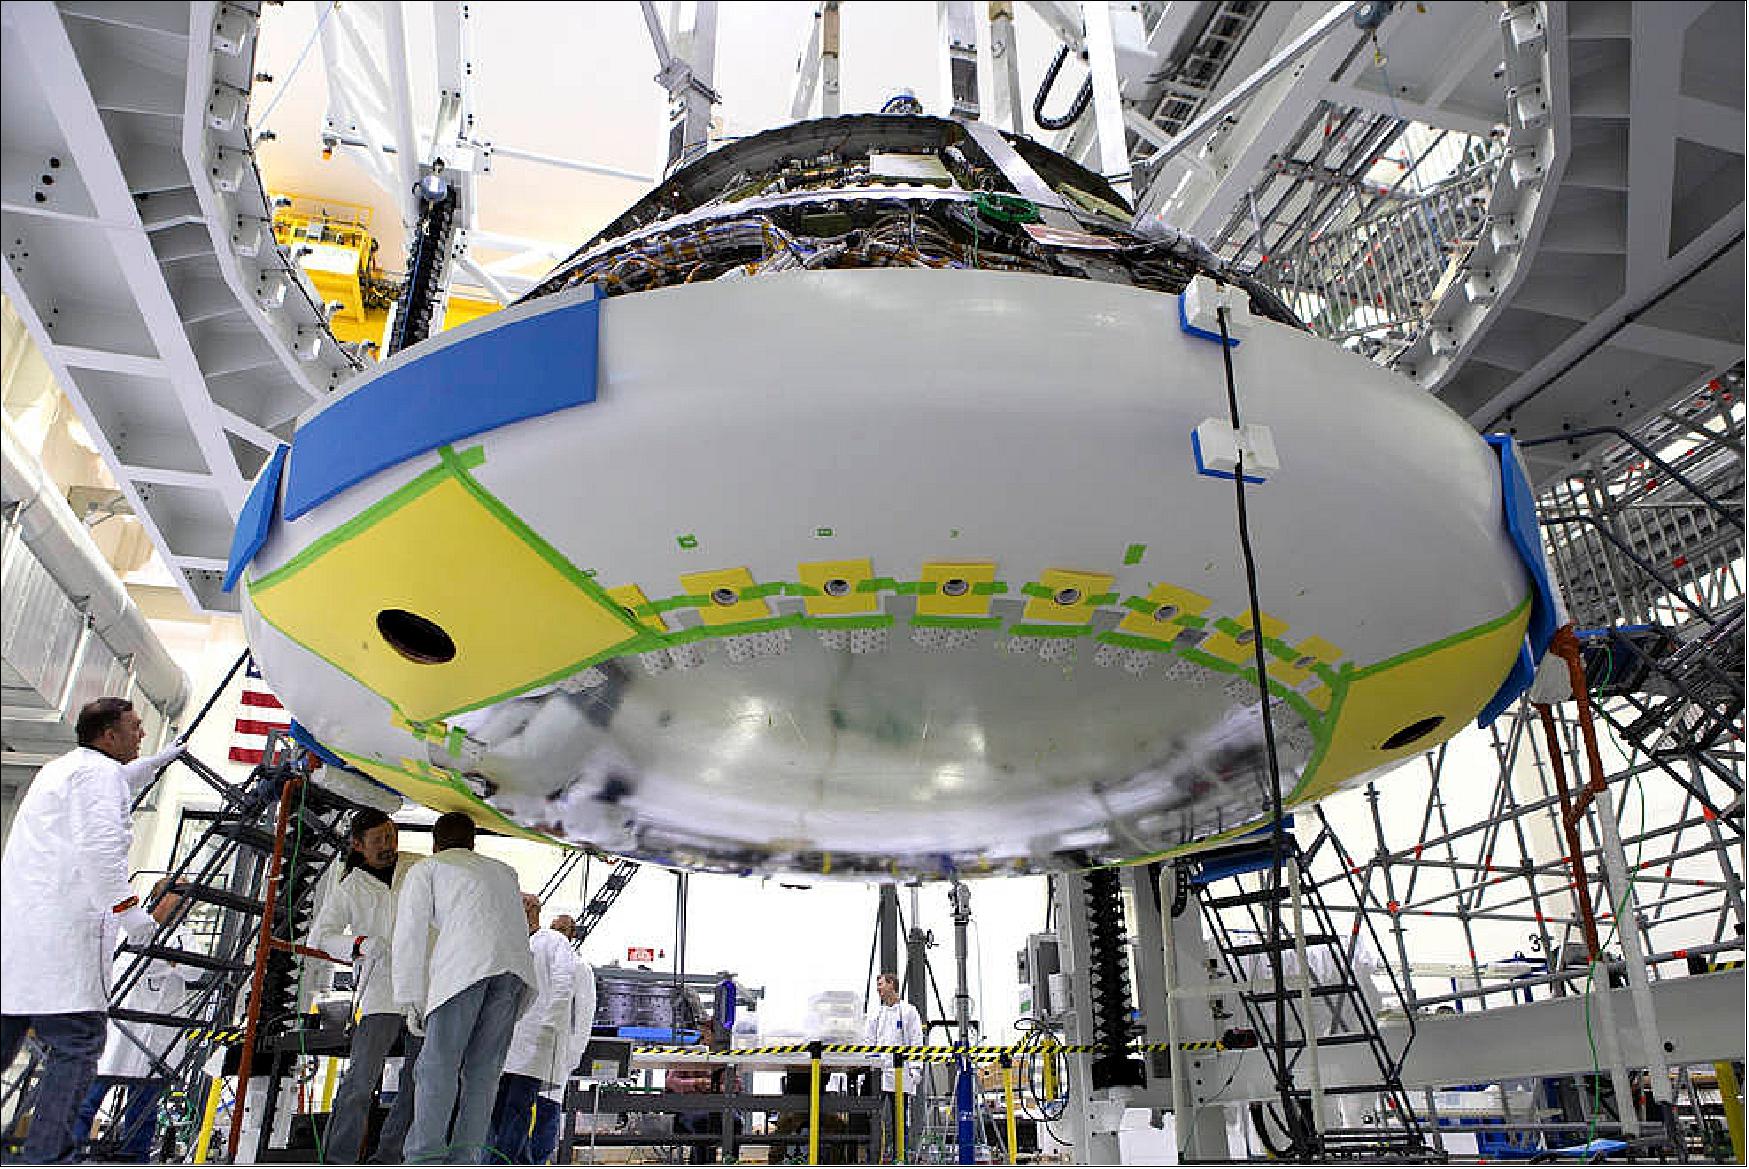 Figure 62: Lockheed Martin engineers and technicians check fittings during installation of the heat shield to the Orion crew module July 25, 2018, inside the Neil Armstrong Operations and Checkout Building high bay at NASA's Kennedy Space Center in Florida (image credit: NASA)